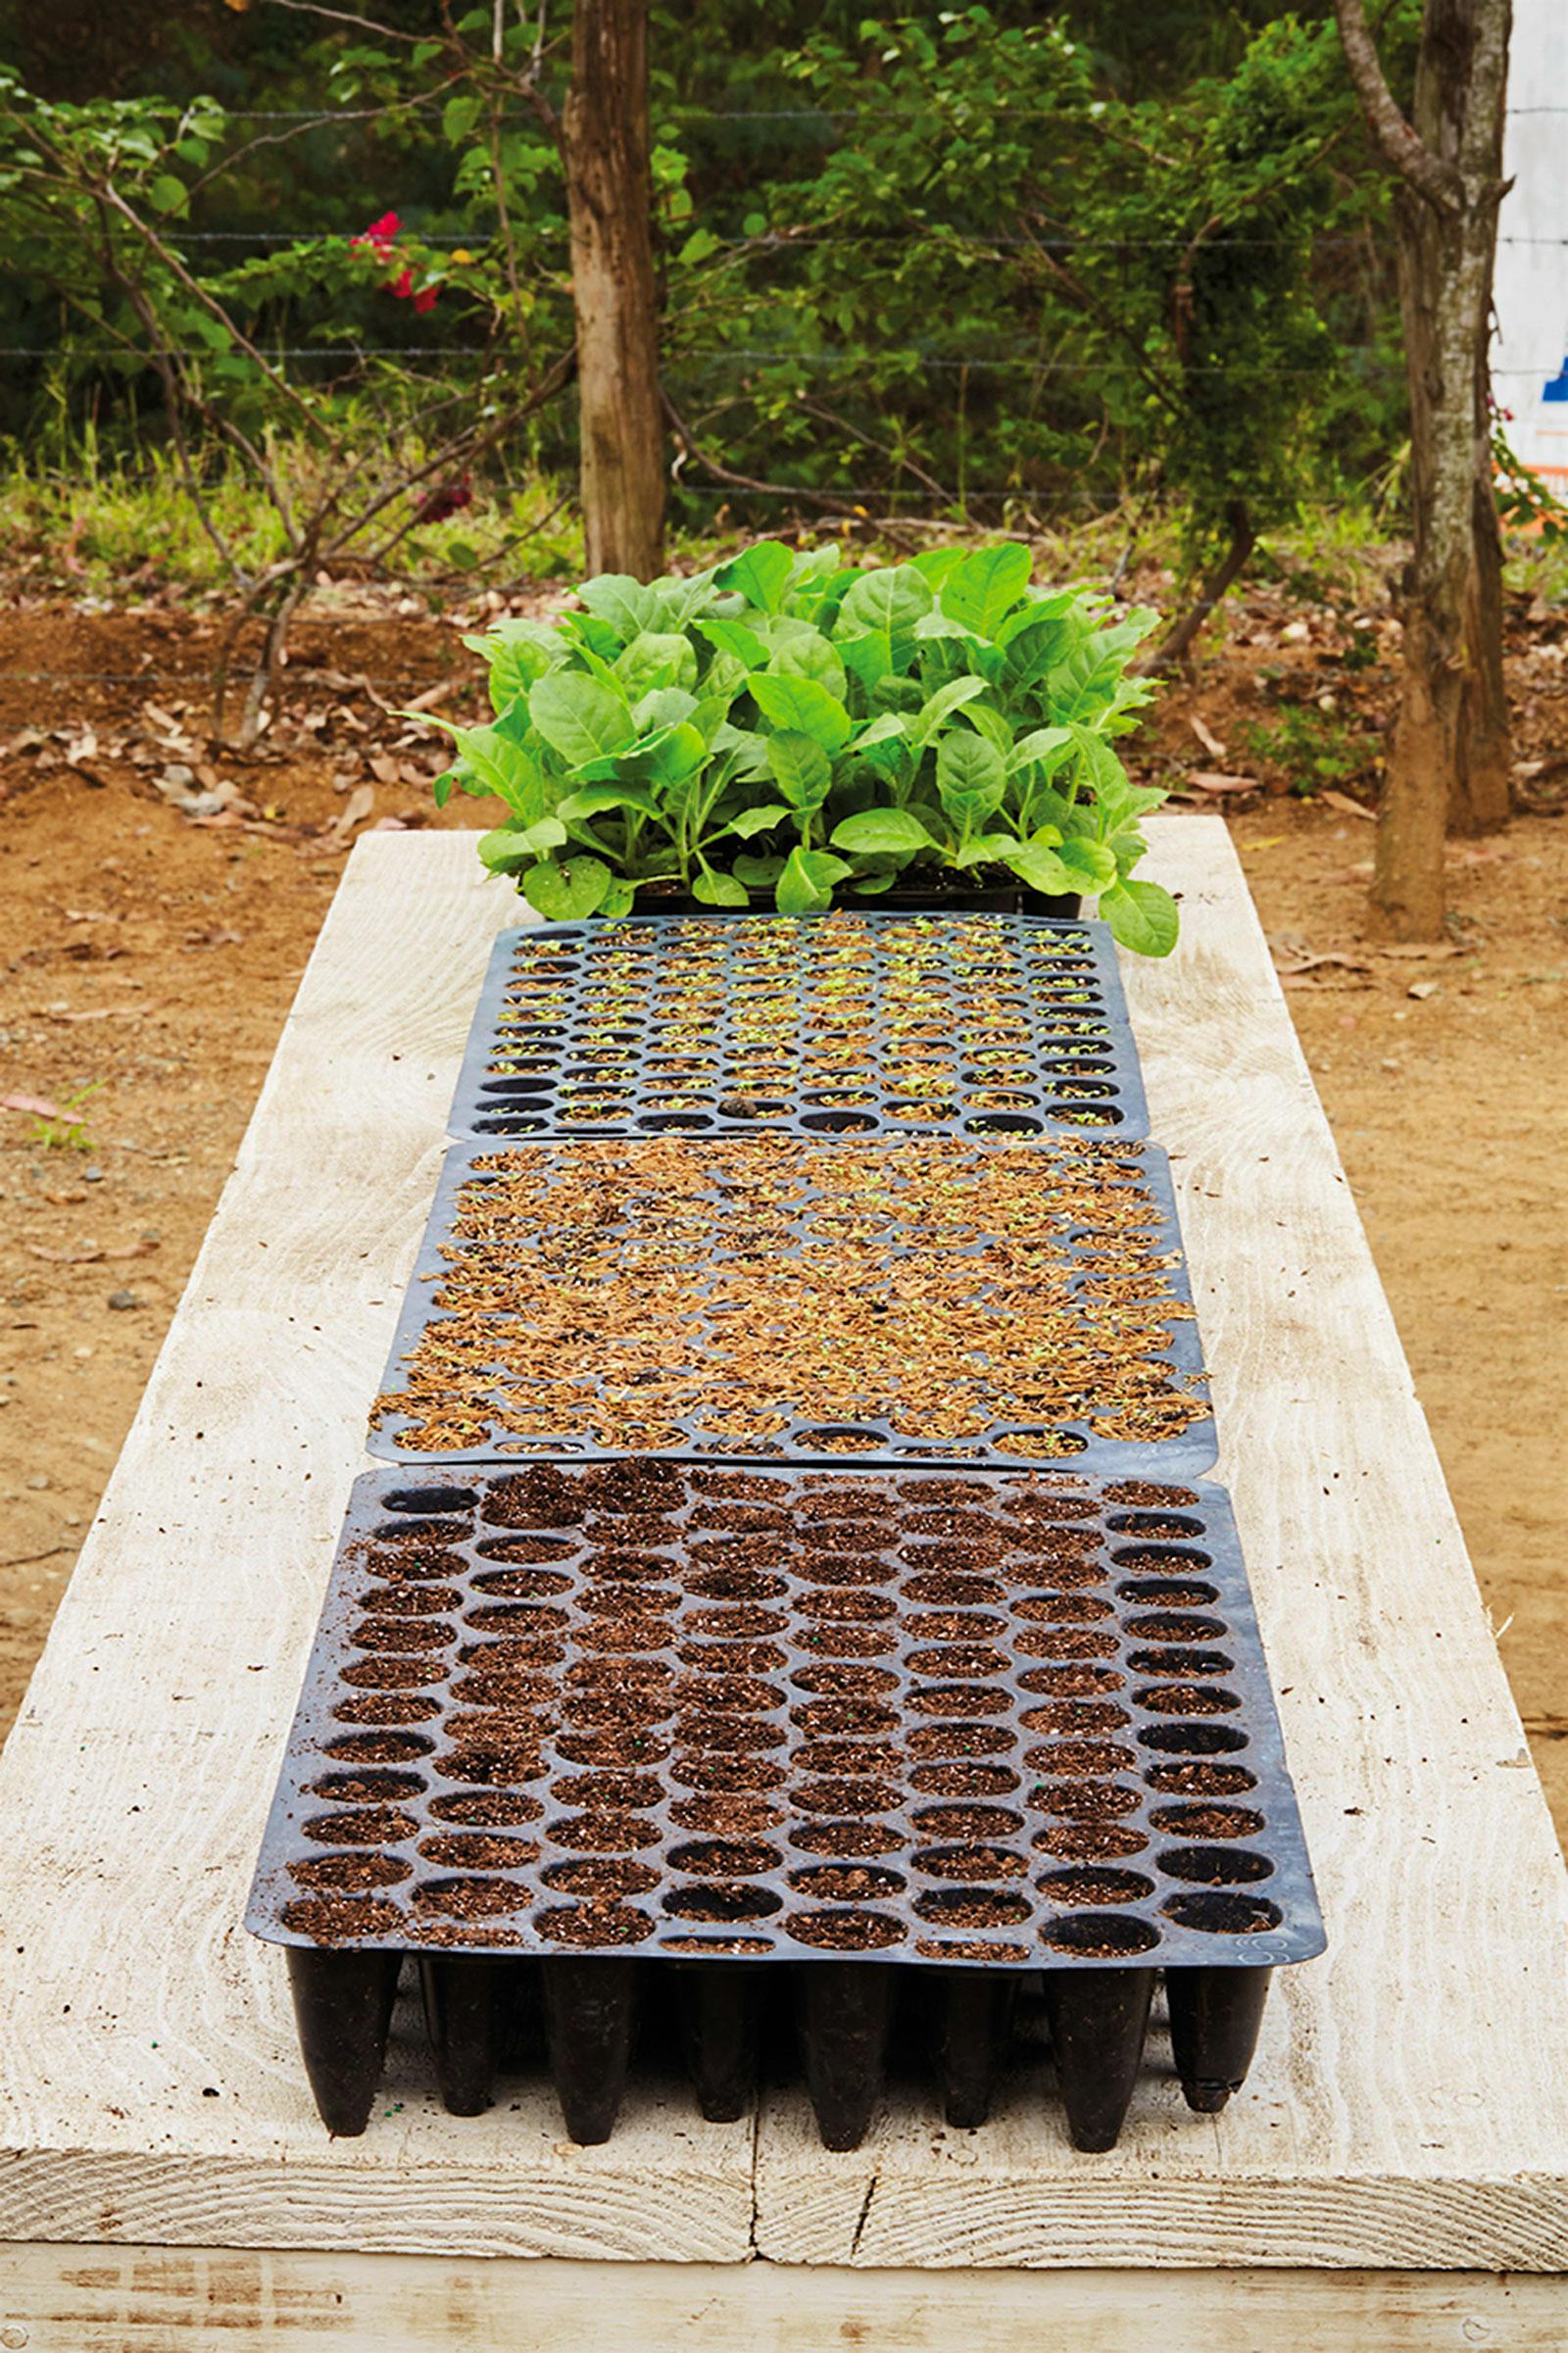 A germination station of seed trays in Mao, the Dominican Republic at General’s farm. Seedlings must grow into plants beofre they go into the field.